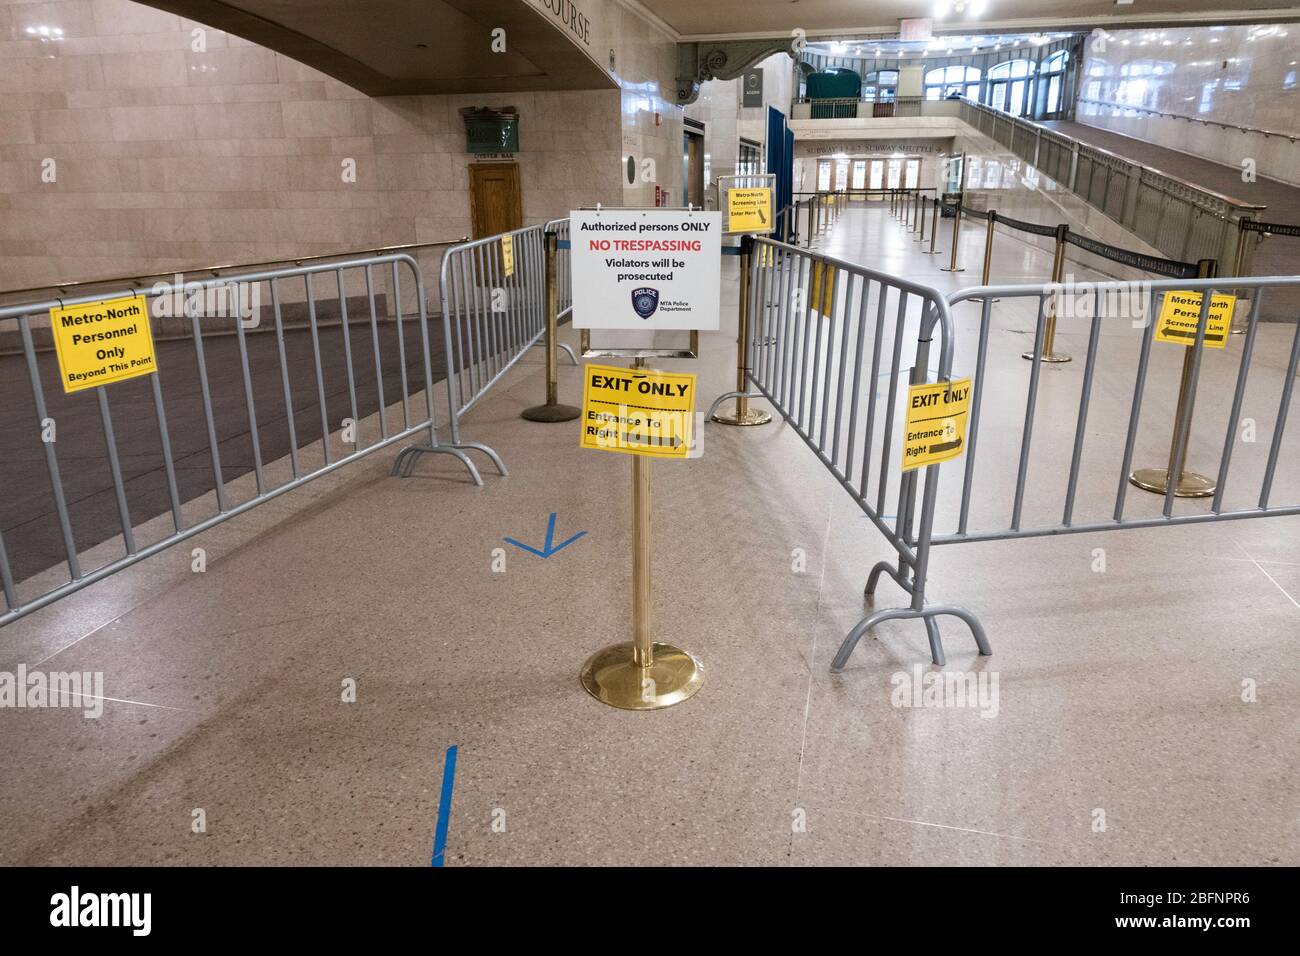 Grand Central is empty due to the COVID-19 pandemic, April 2020, New York City, USA Stock Photo